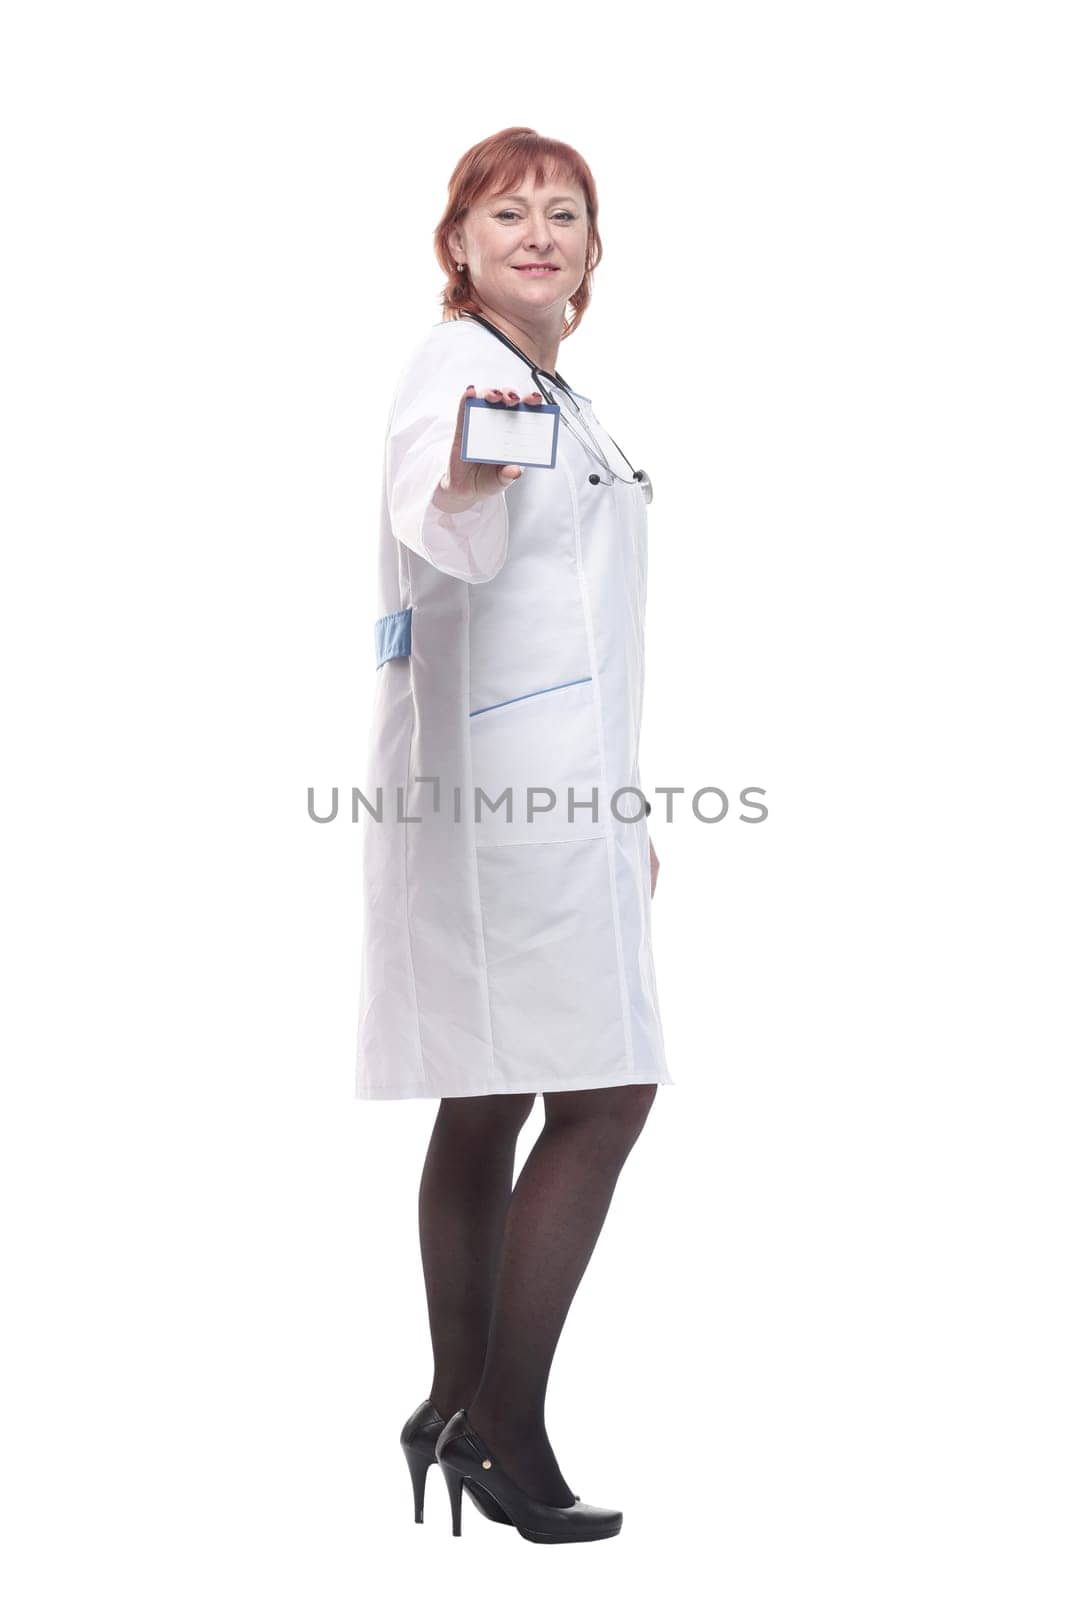 in full growth. competent female doctor showing her business card . isolated on a white background.